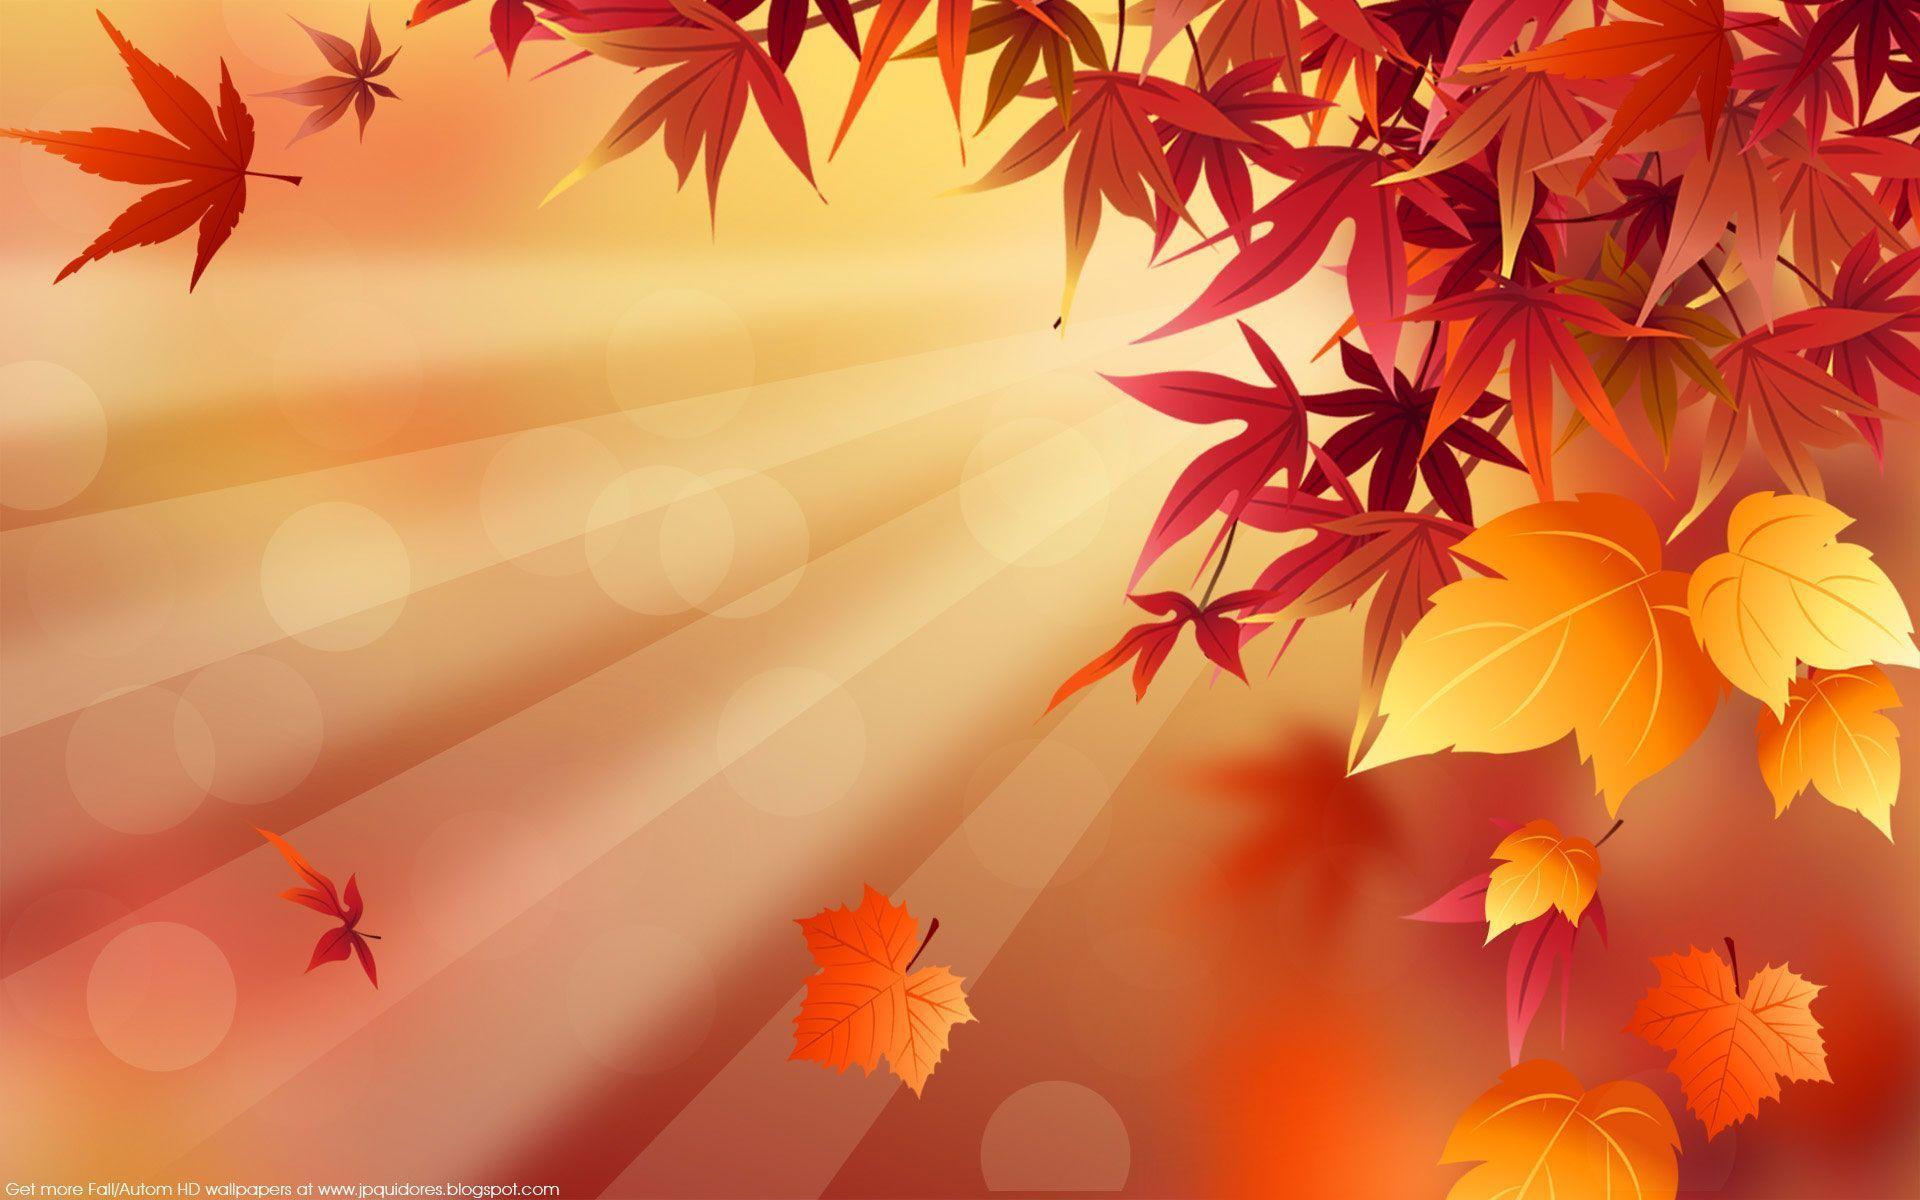 Image For > Fall Harvest Hd Wallpapers